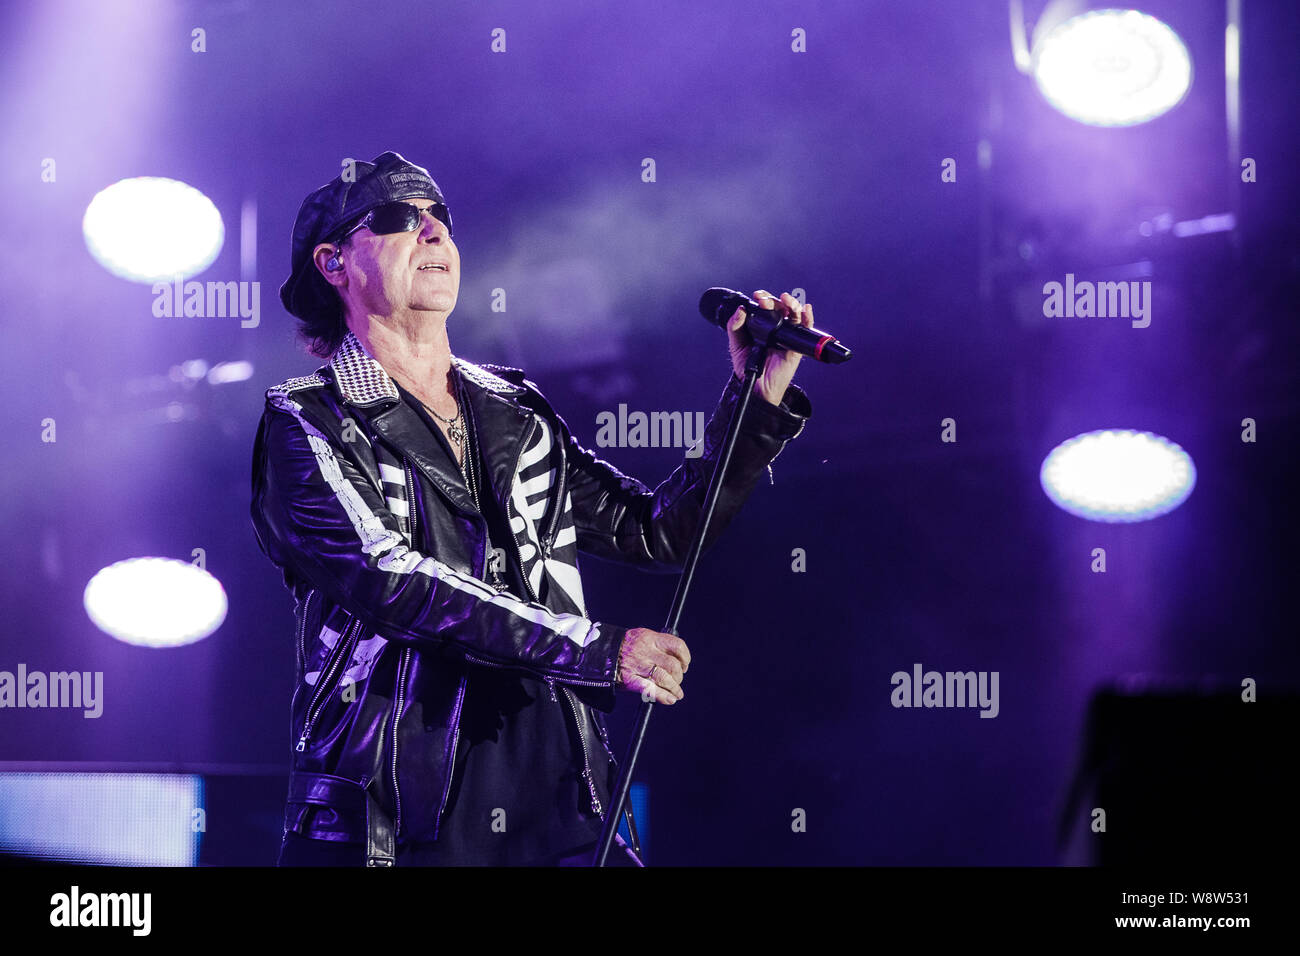 Scorpions perform live on stage at Bloodstock Open Air Festival, UK, 11th Aug, 2019. Stock Photo